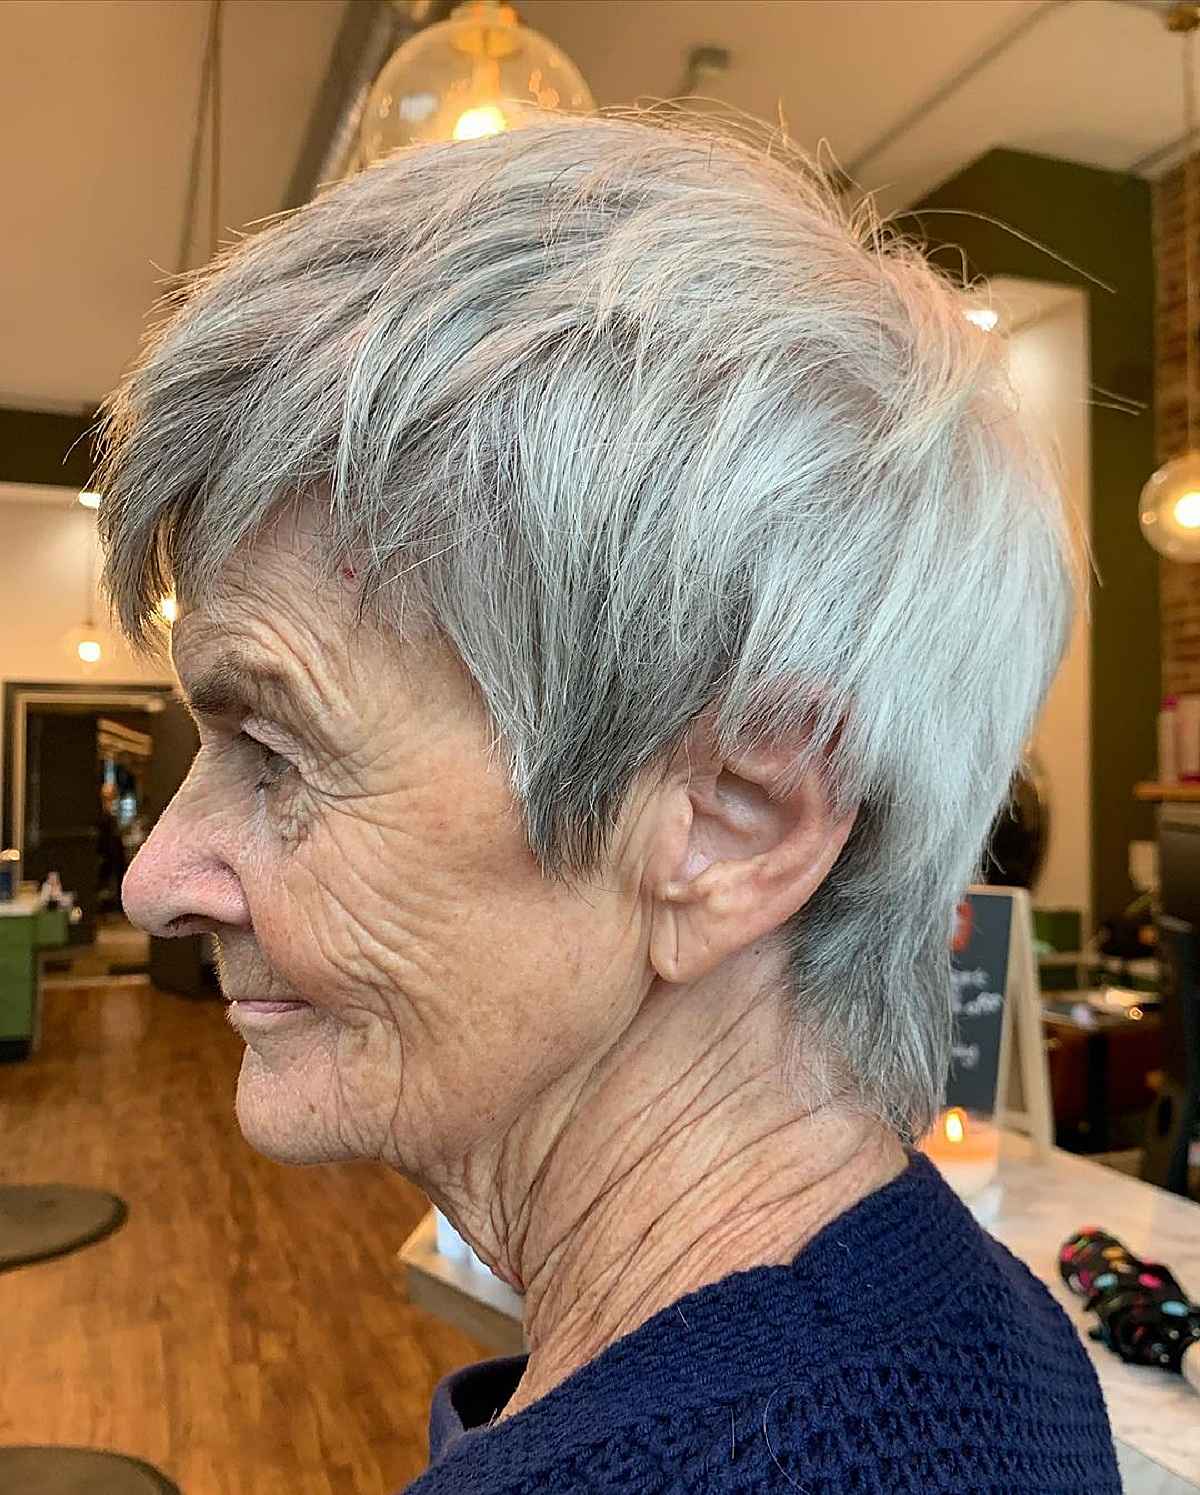 15 Edgy Hairstyles for Women Over 70 with Sass